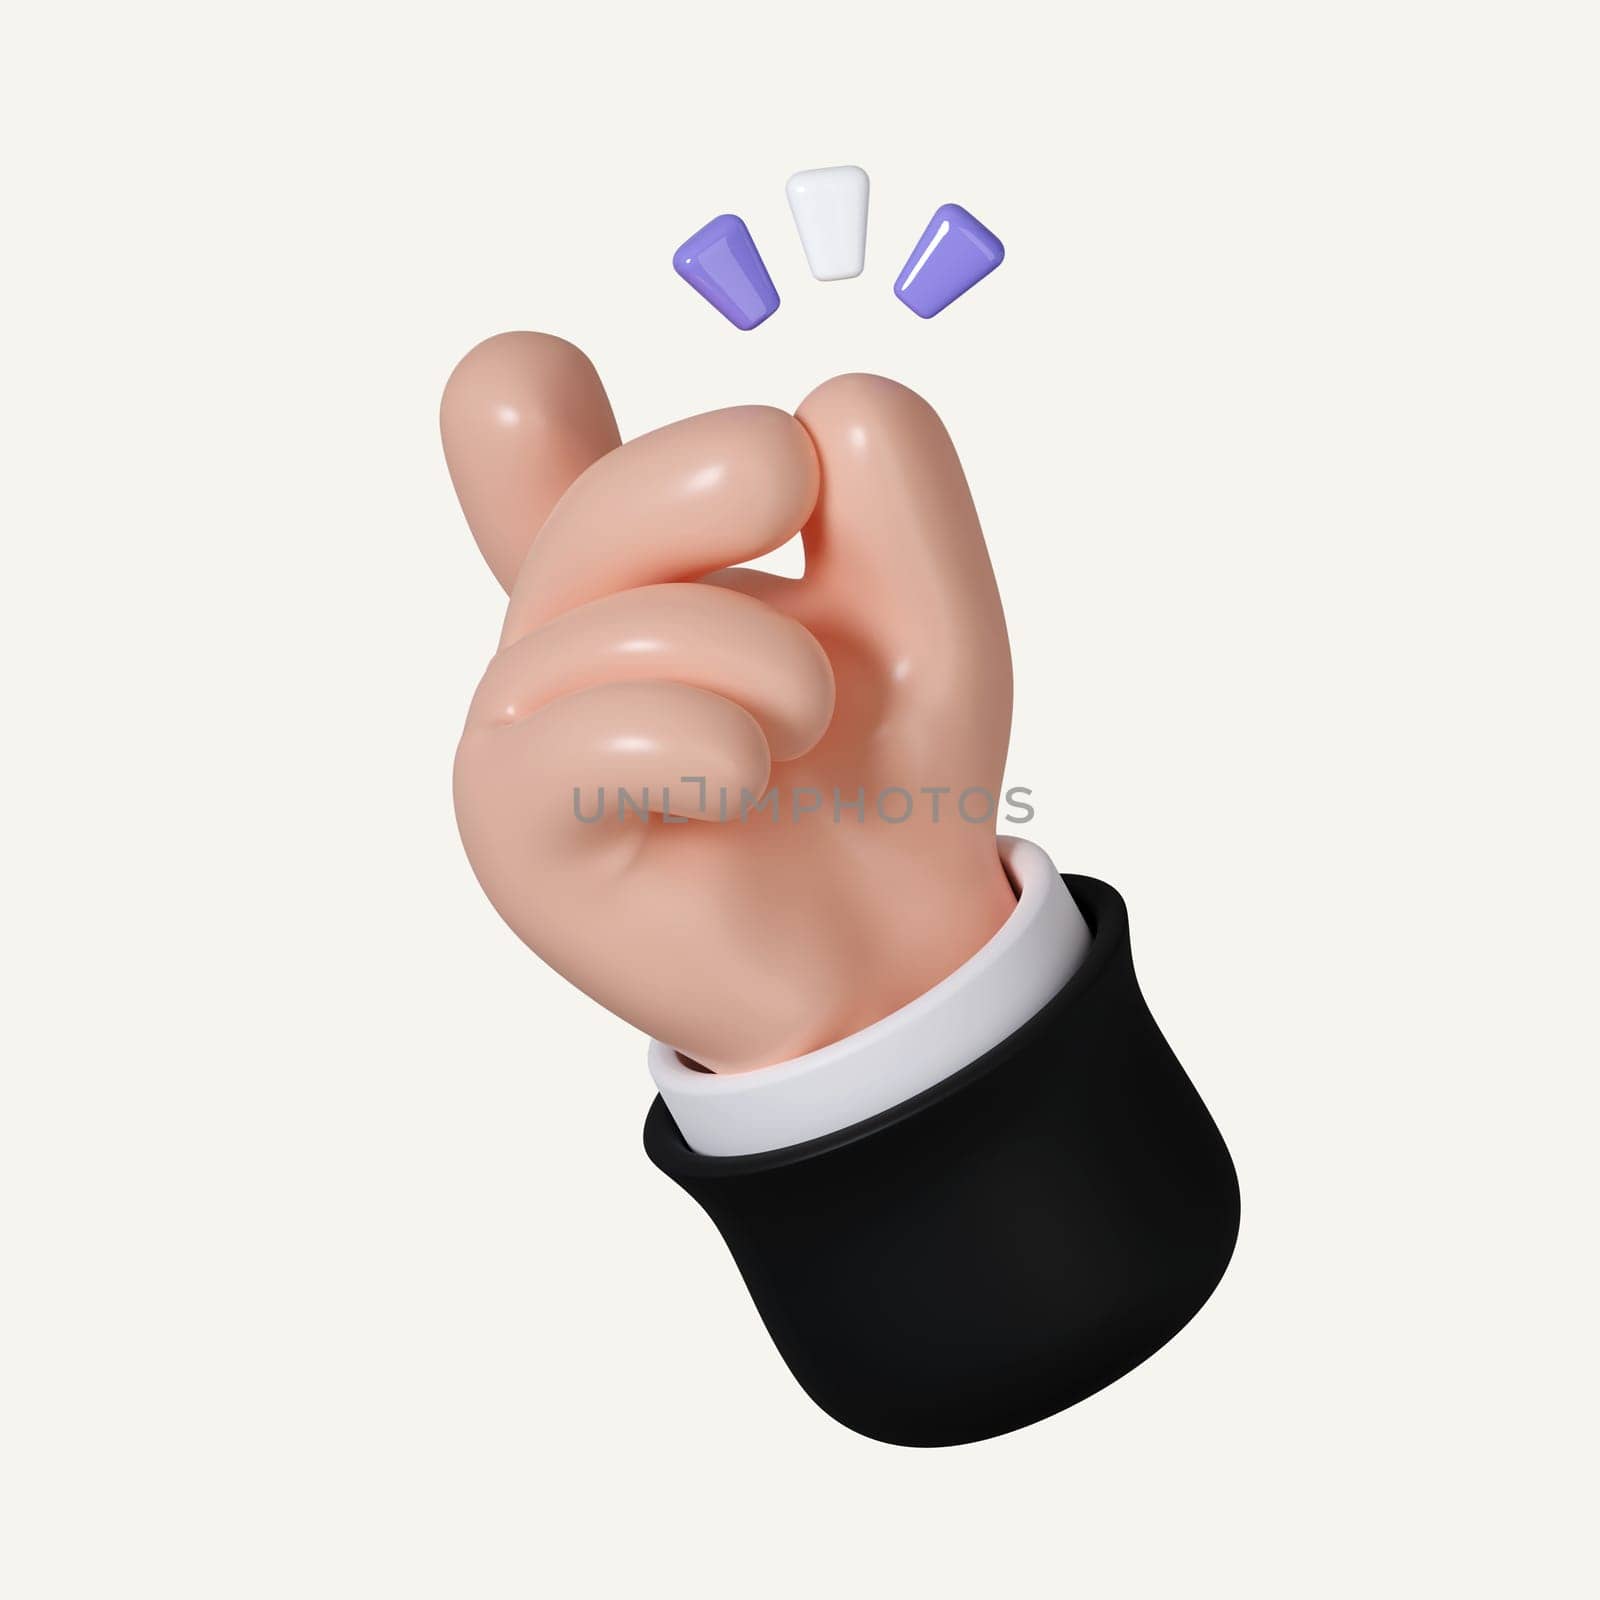 Cartoon hand showing snap gesture icon isolated on white background, 3d rendering illustration. Clipping path.